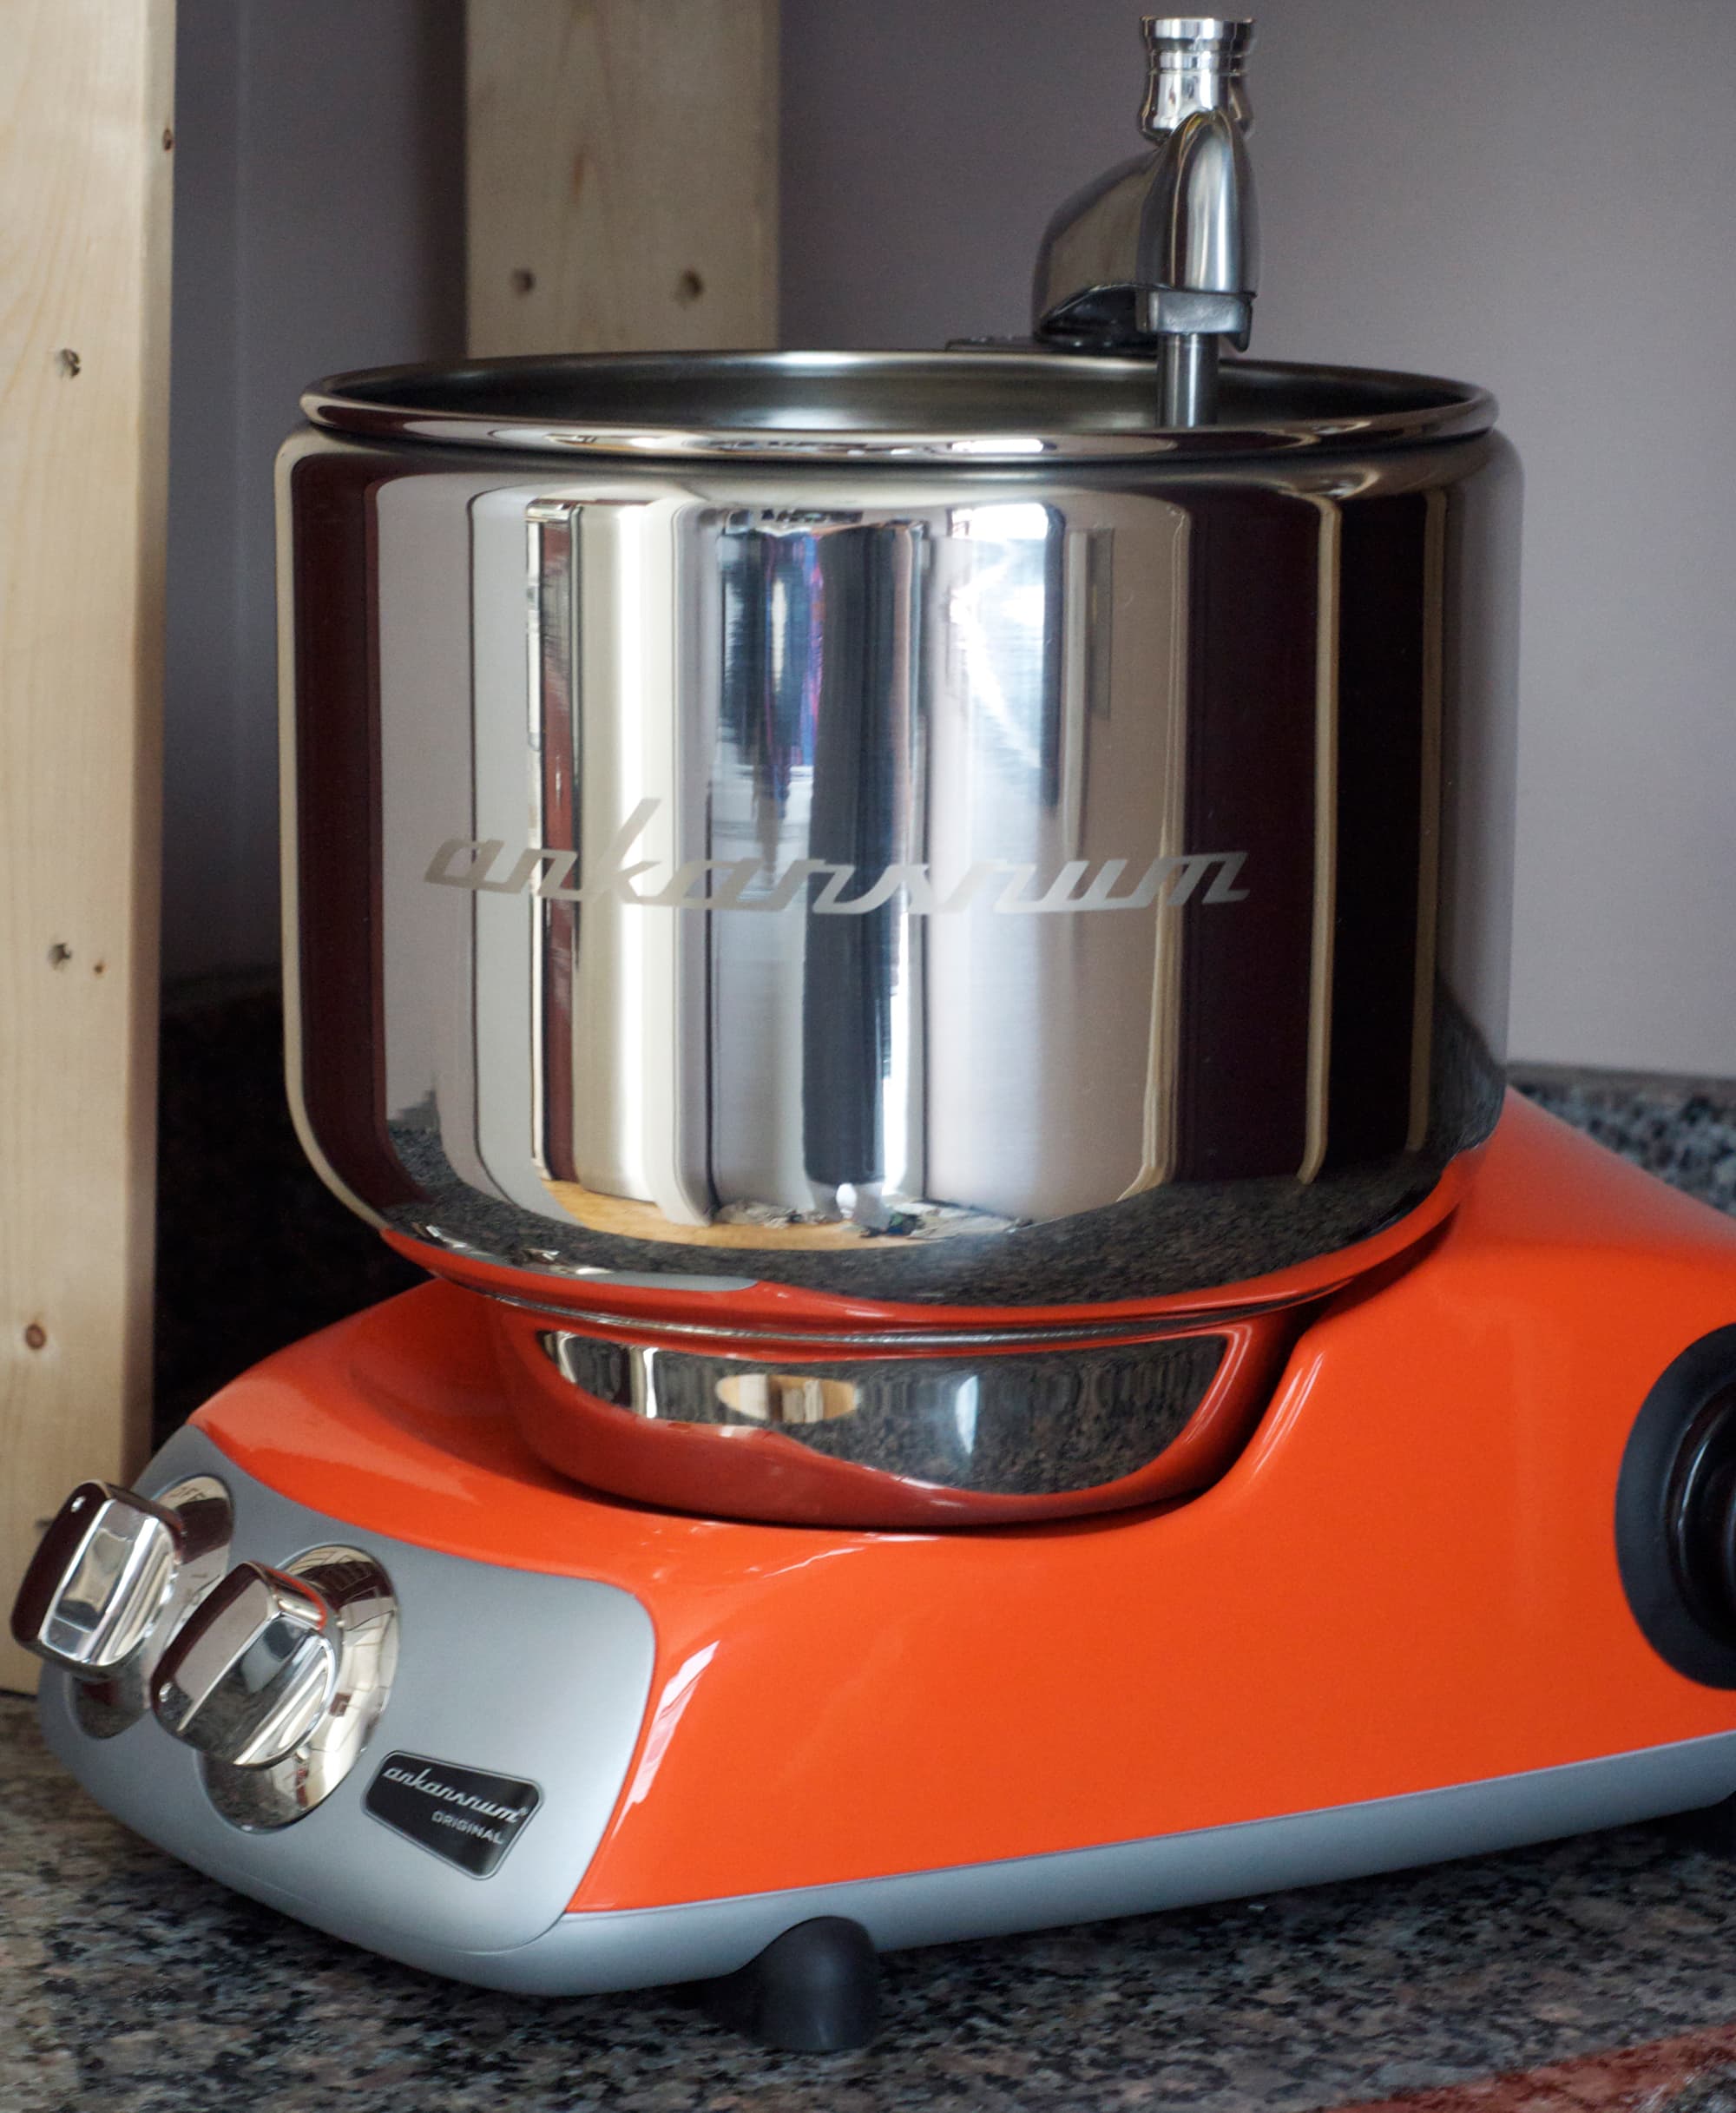 Ankarsrum Mixer Review: This Splurge-Worthy Mixer Is a Baker's Dream